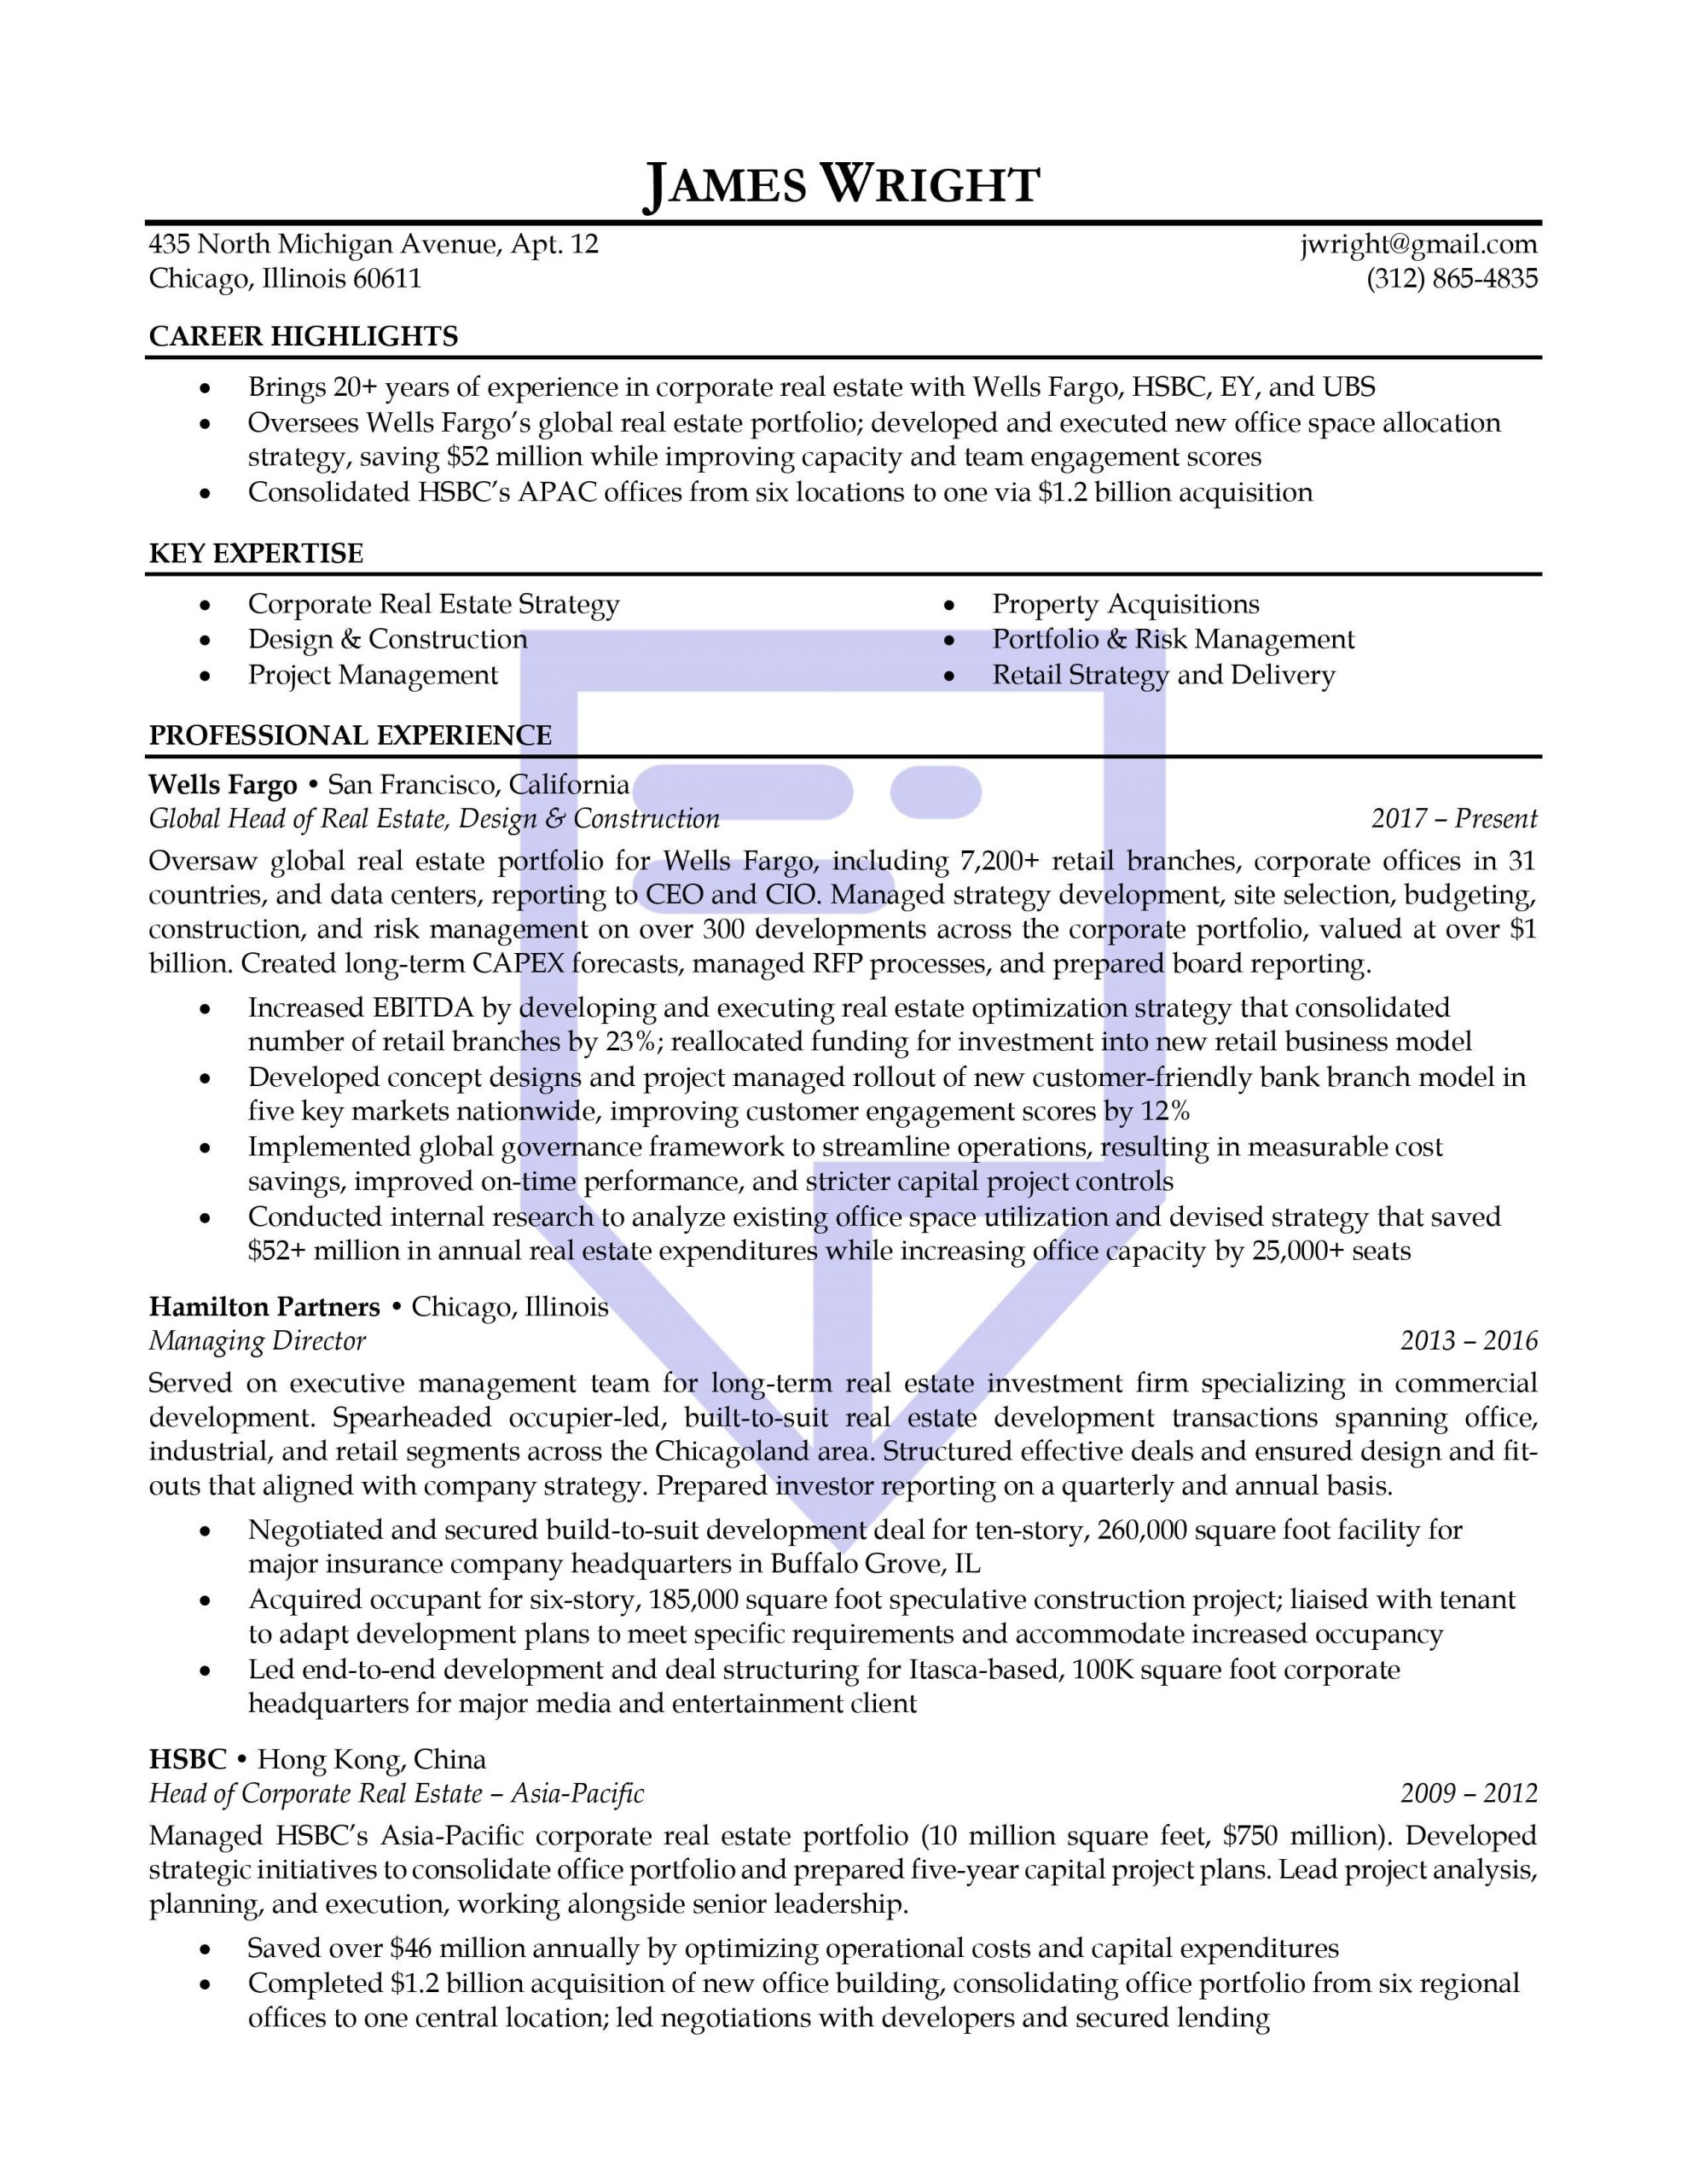 Real Estate Project Manager Resume Sample High-impact Real Estate Executive Resume Sample â Resume Pilots